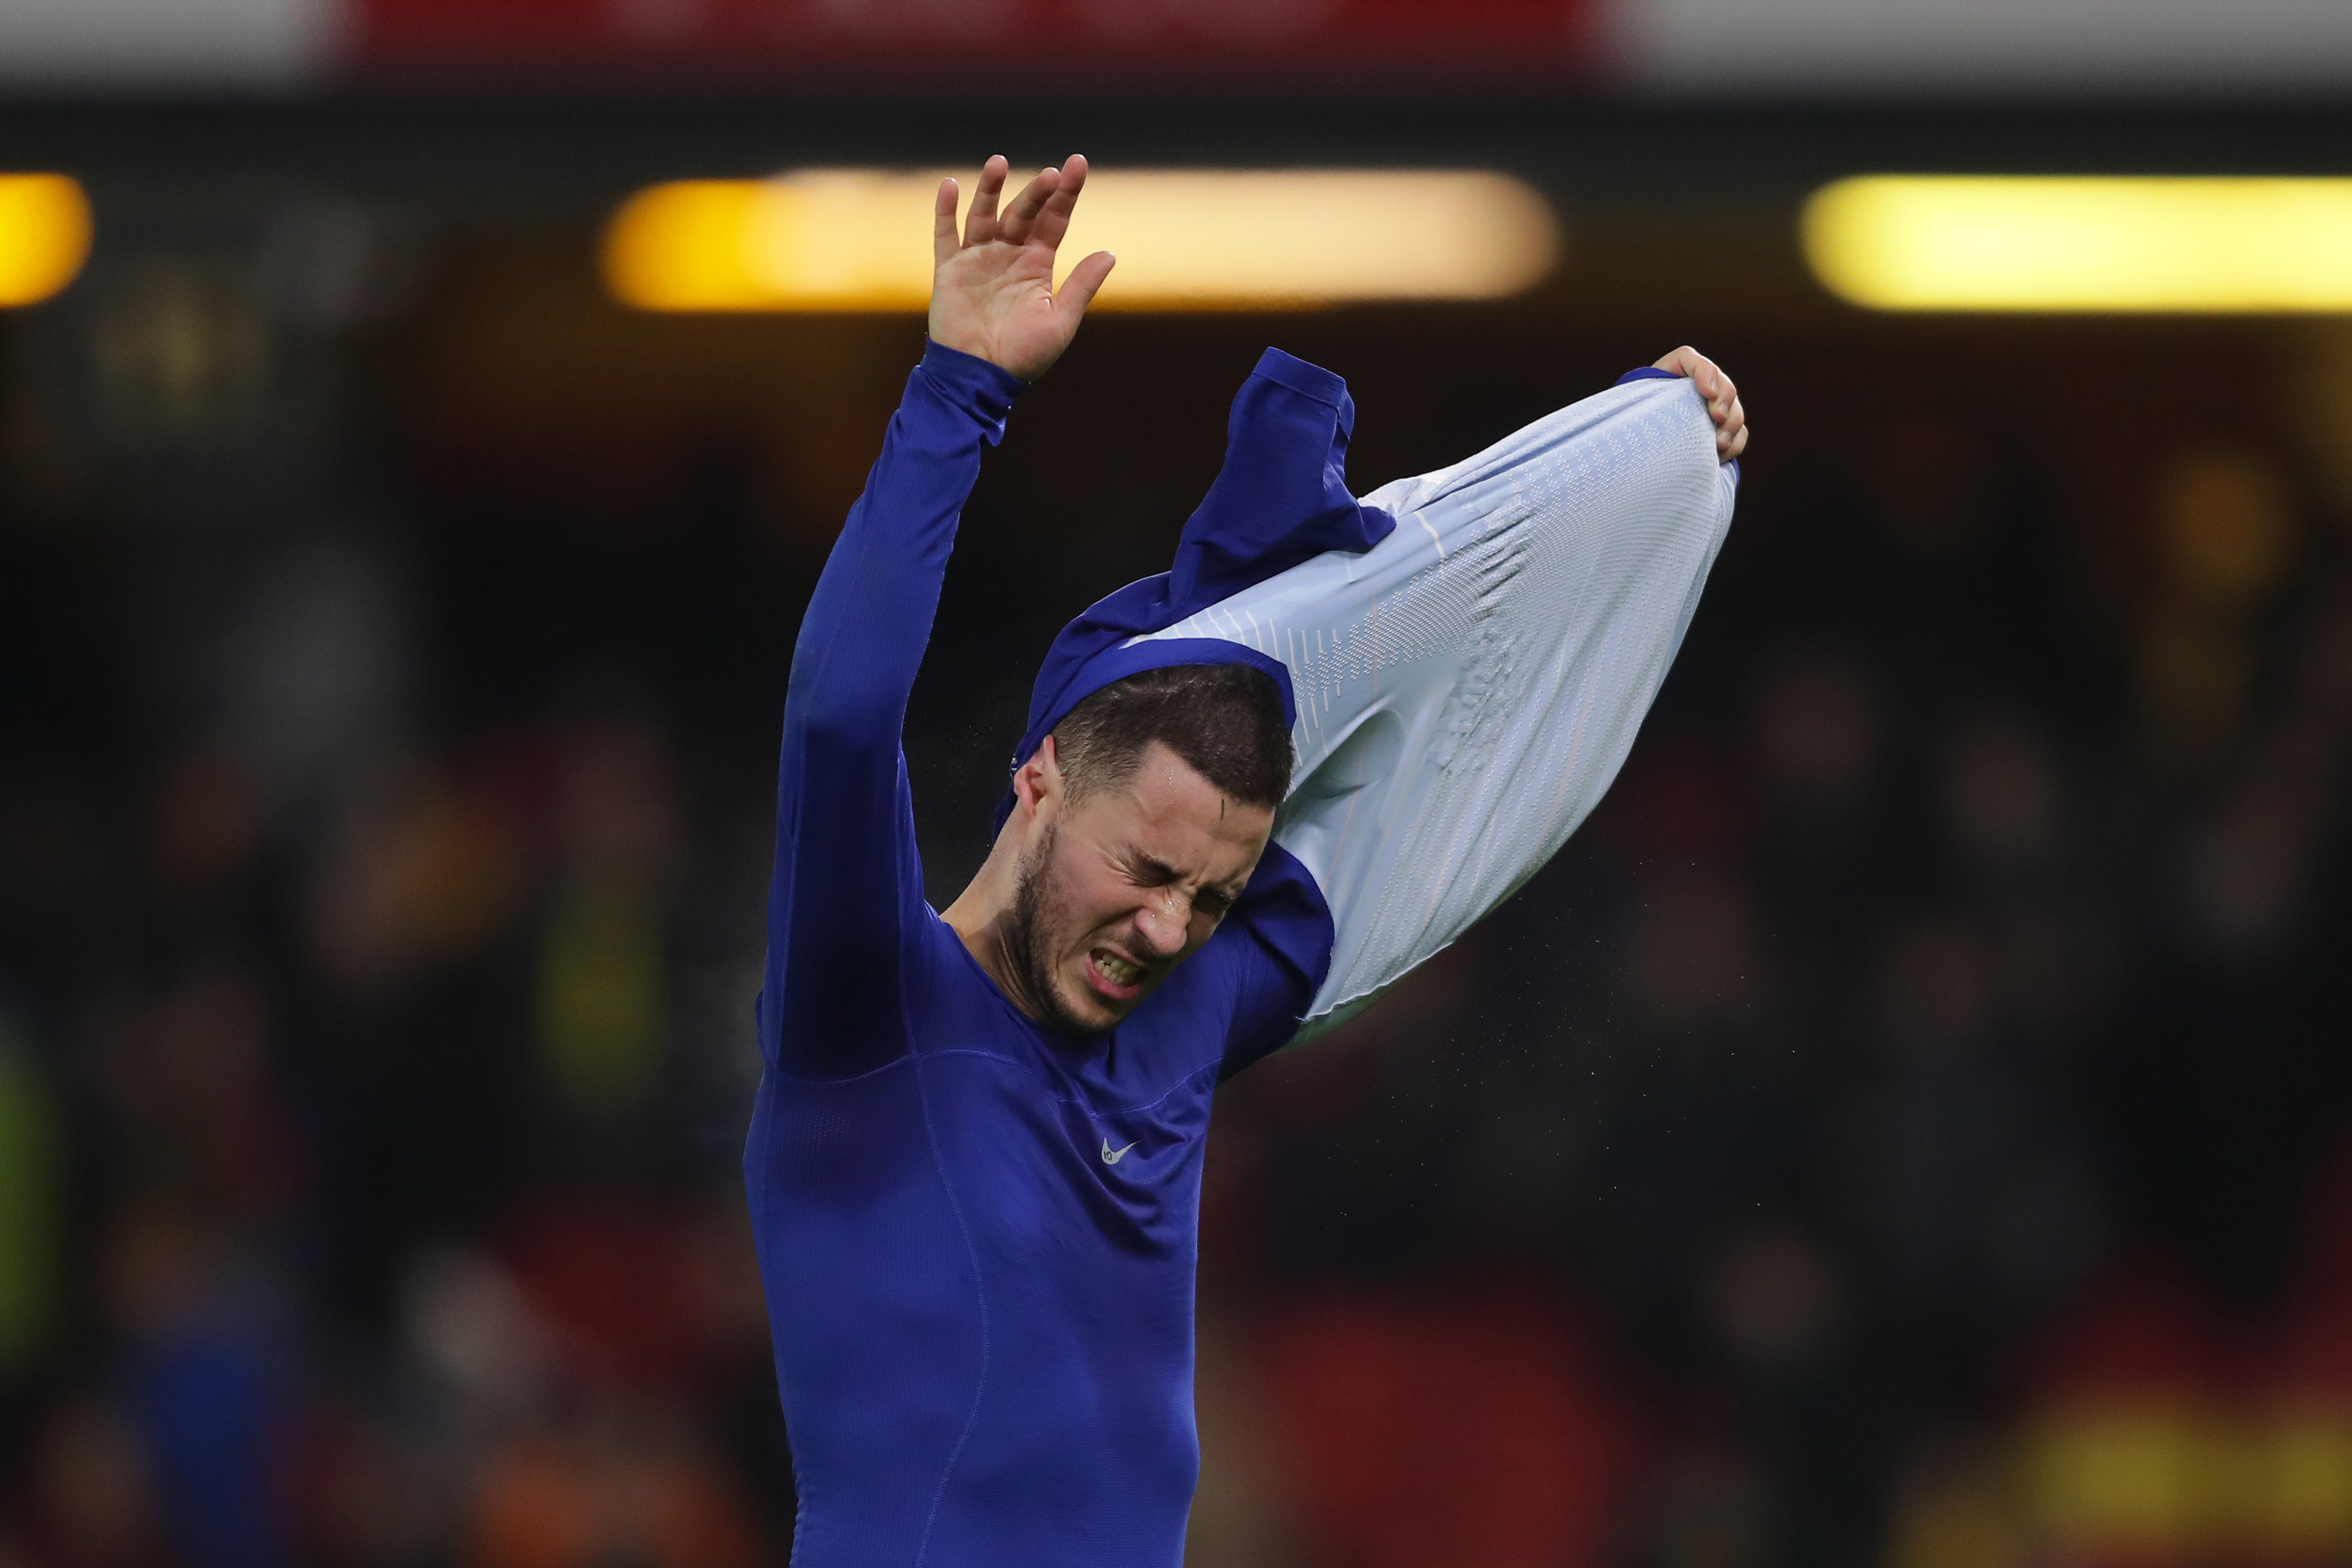 WATFORD, ENGLAND - DECEMBER 26:  Eden Hazard of Chelsea throws his shirt to the fans following his side's victory in the Premier League match between Watford FC and Chelsea FC at Vicarage Road on December 26, 2018 in Watford, United Kingdom.  (Photo by Richard Heathcote/Getty Images)